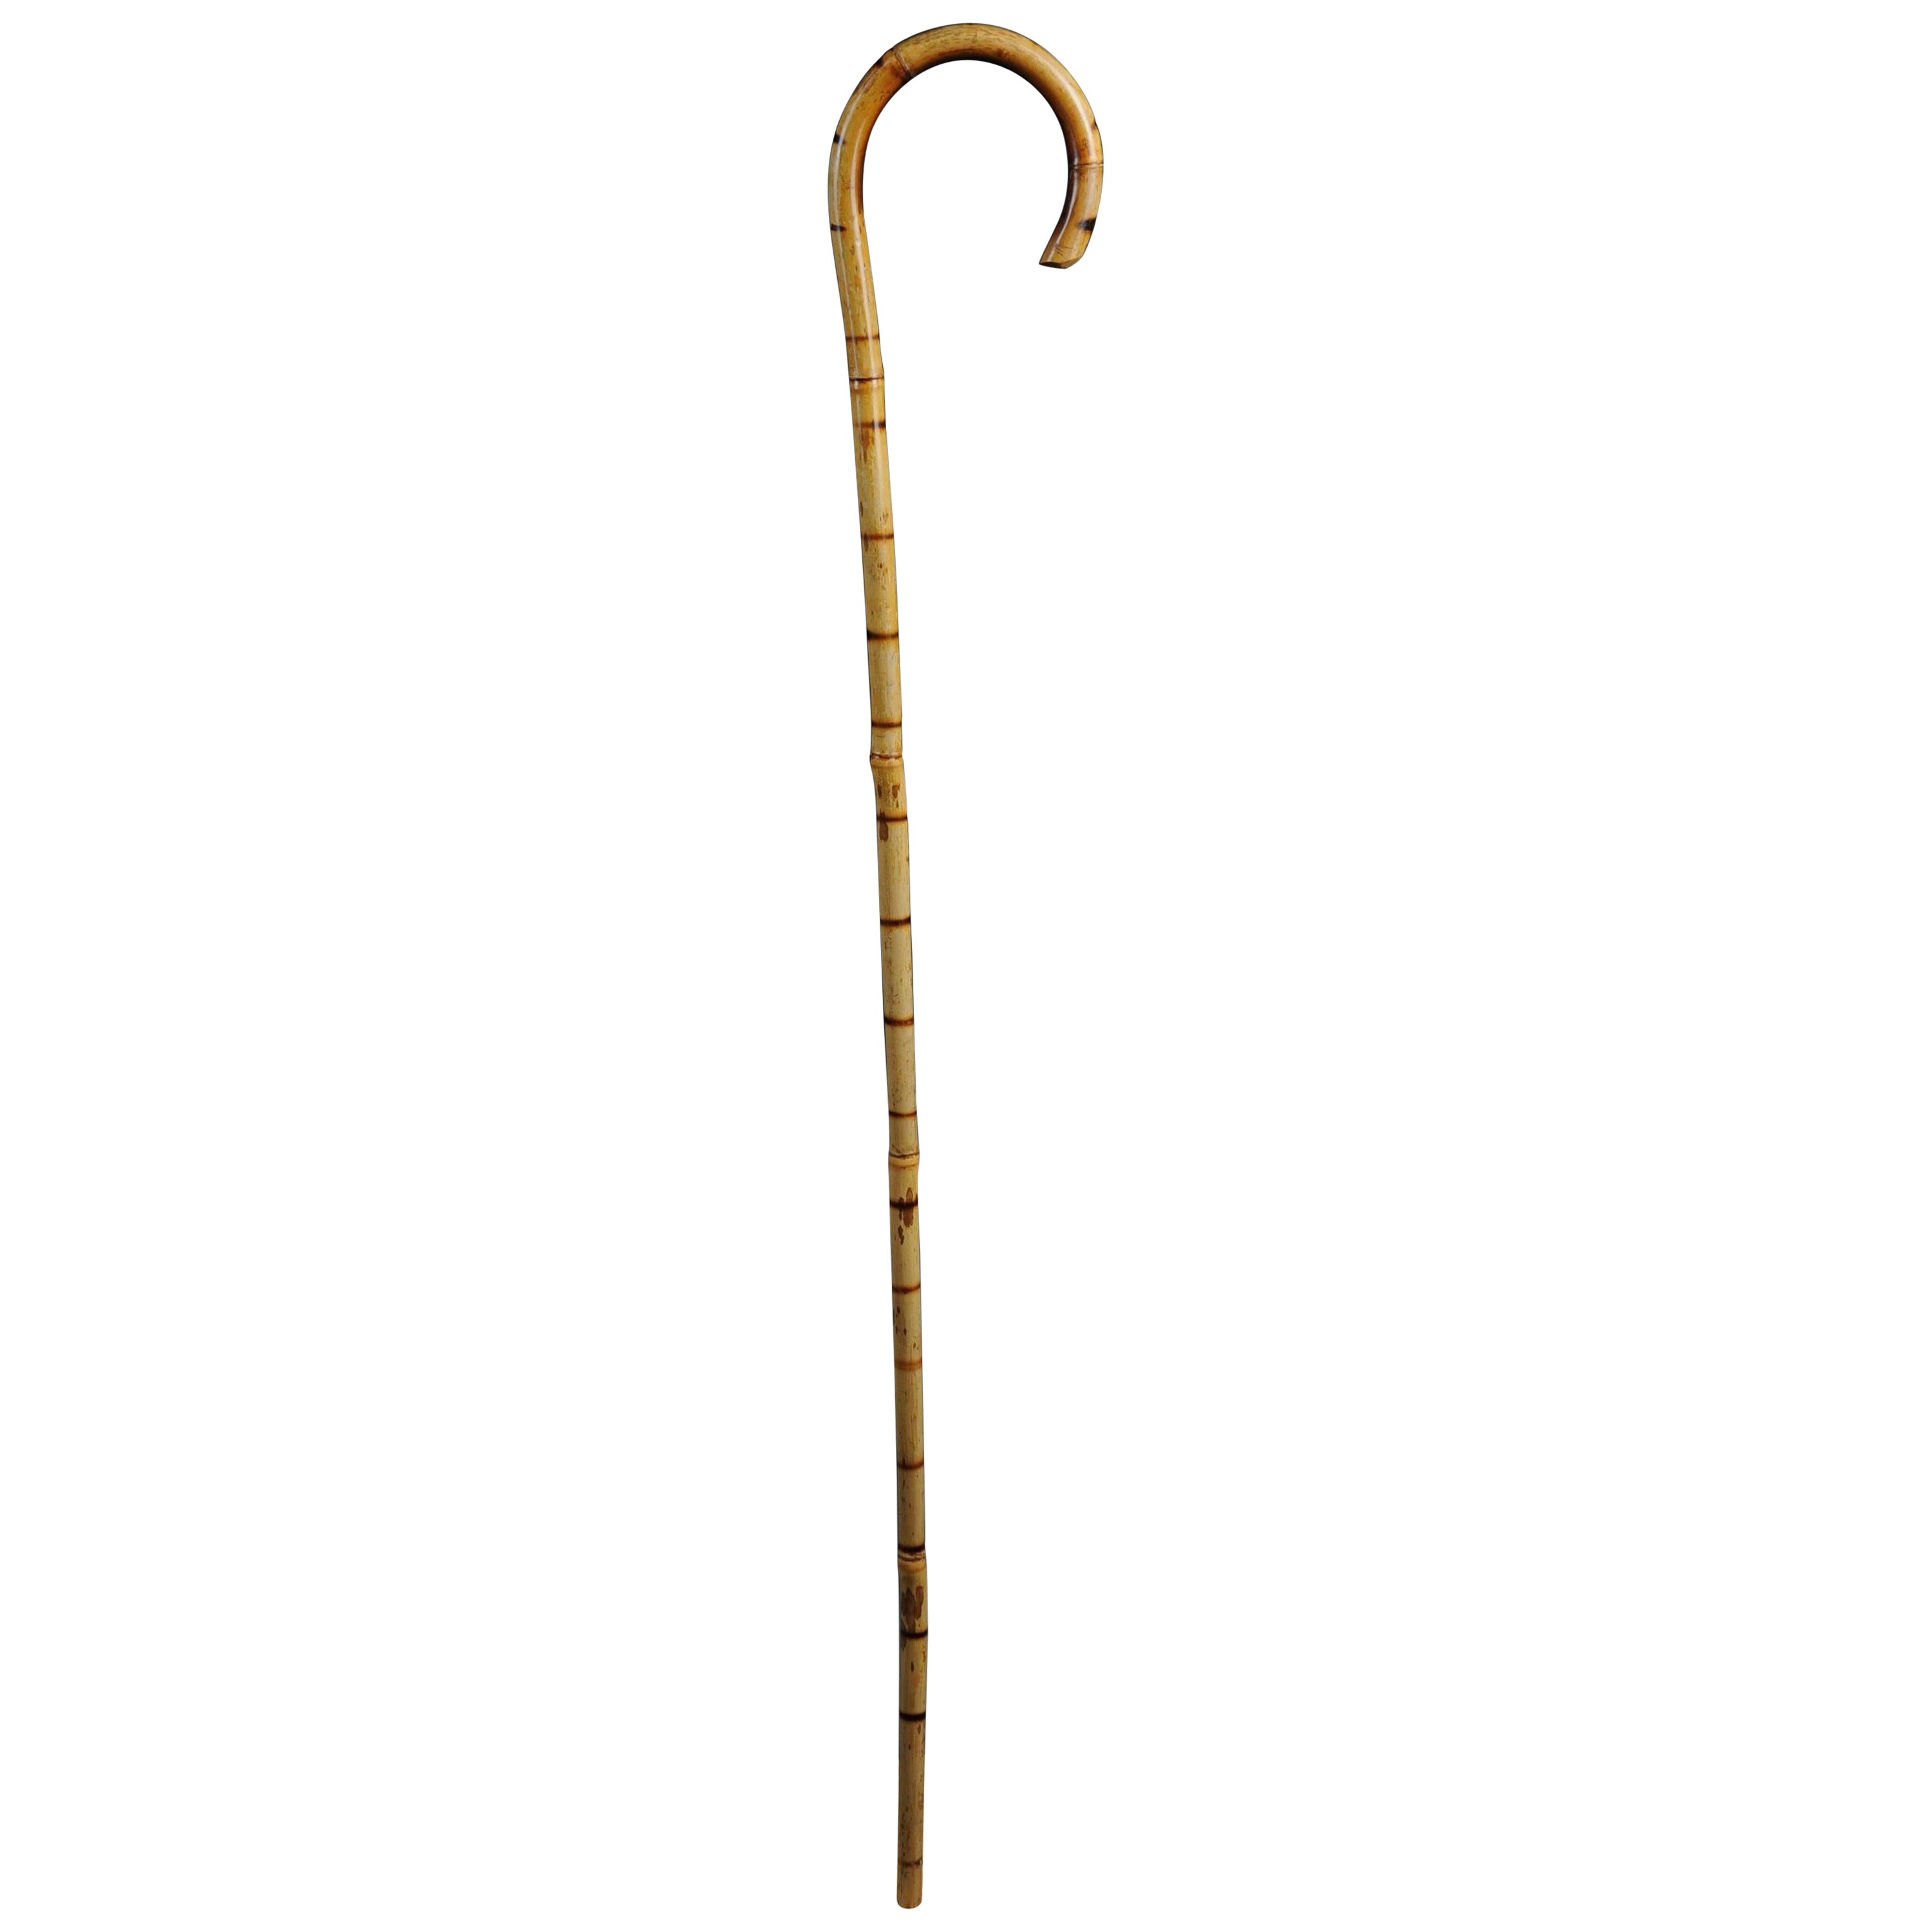 Antique Walking Stick / Cane, Germany with Around 1910